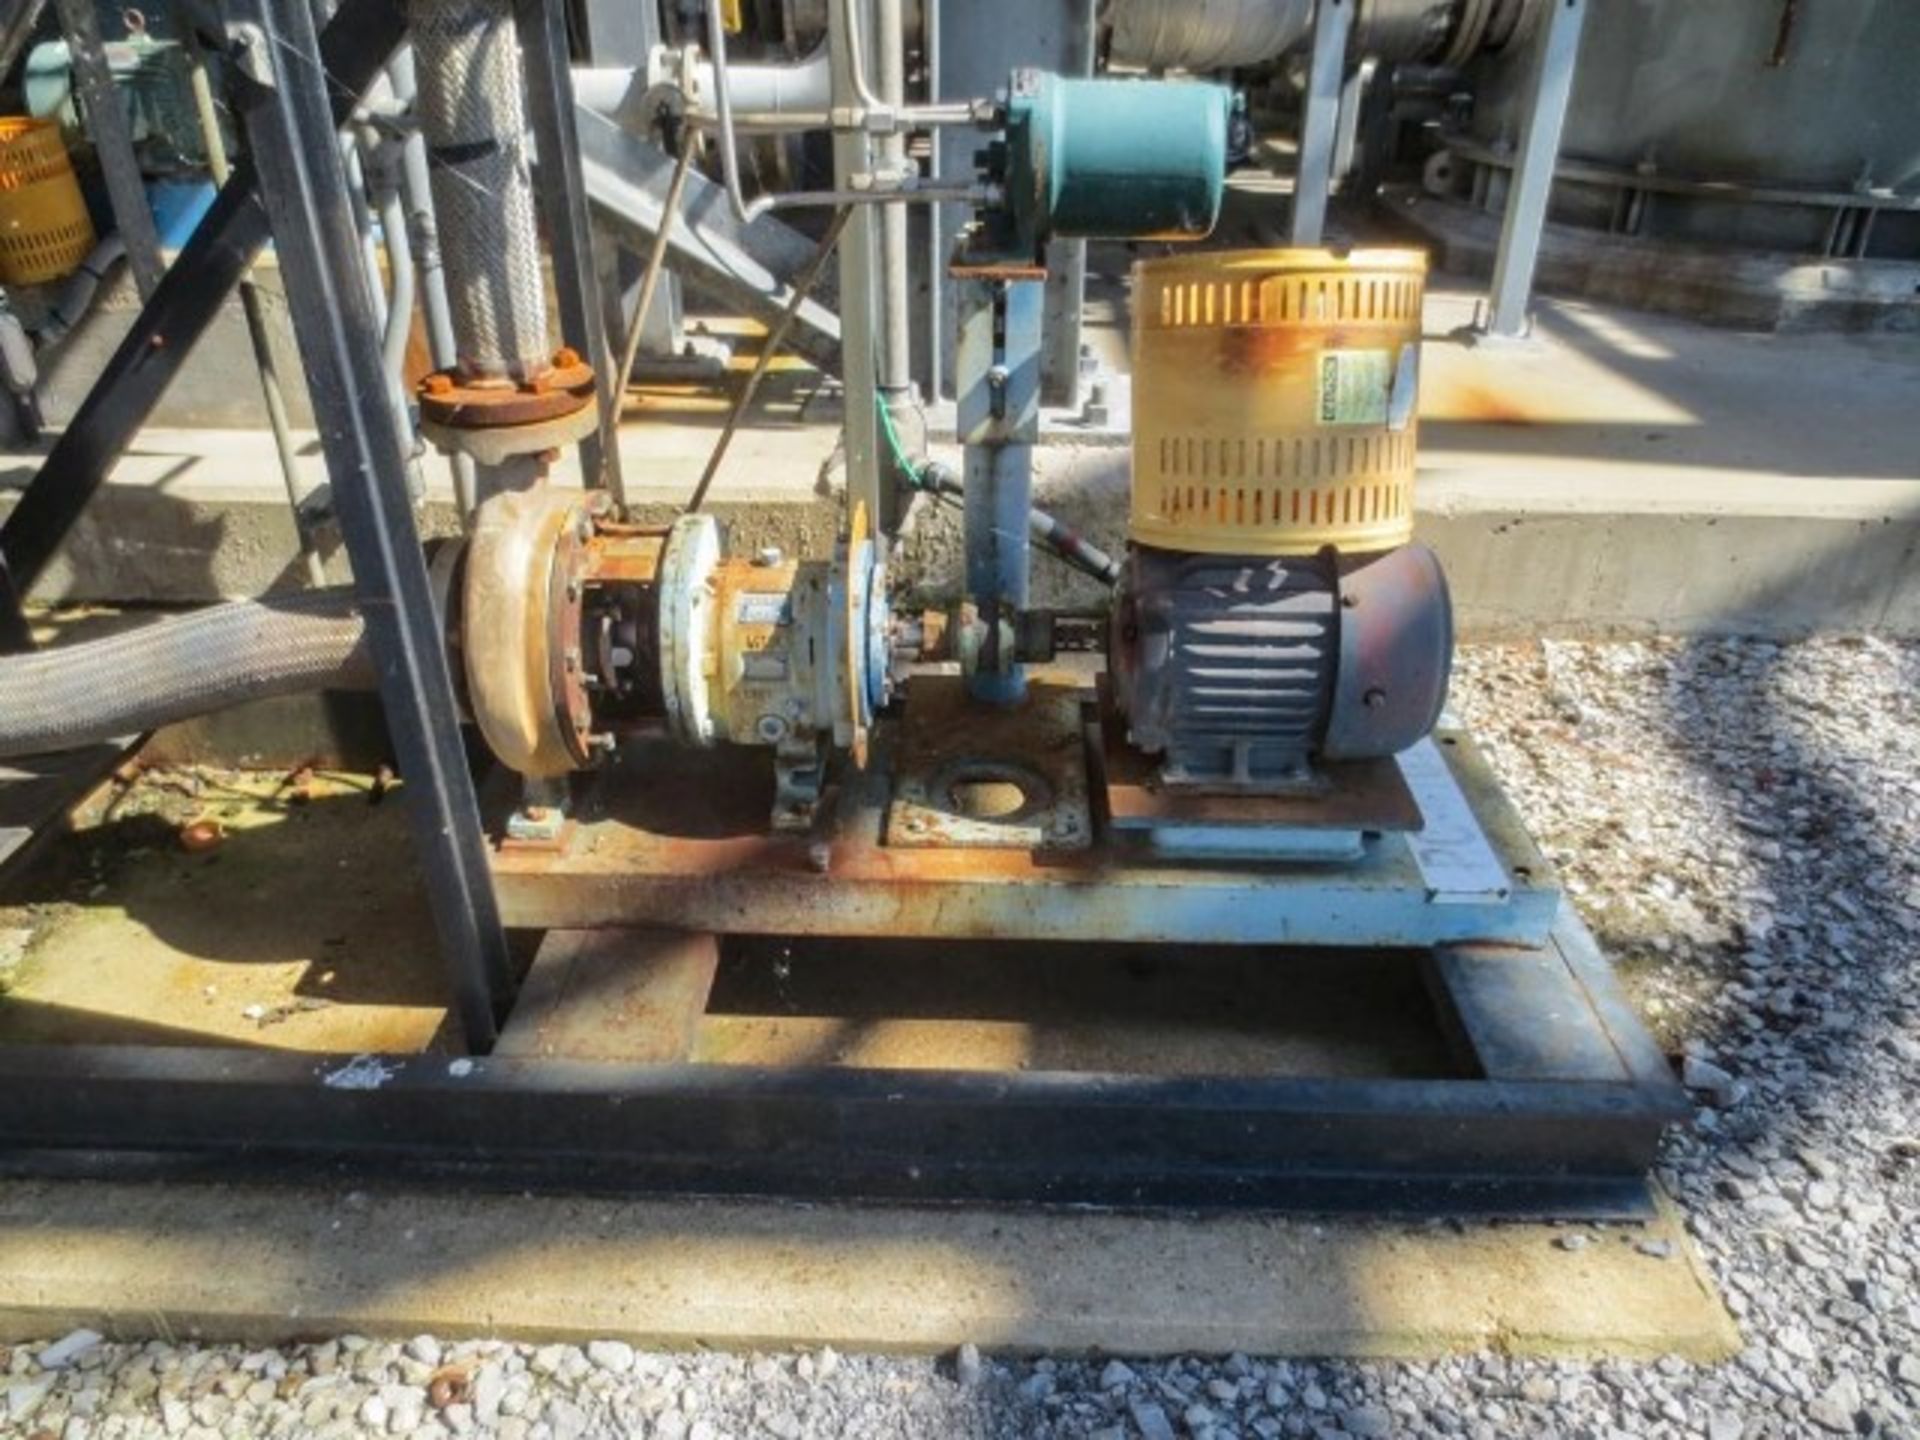 Goulds centrifugal pump, model 3196. Size 3X4-10 with 8.25" impeller Rigging/Loading Fee: $850